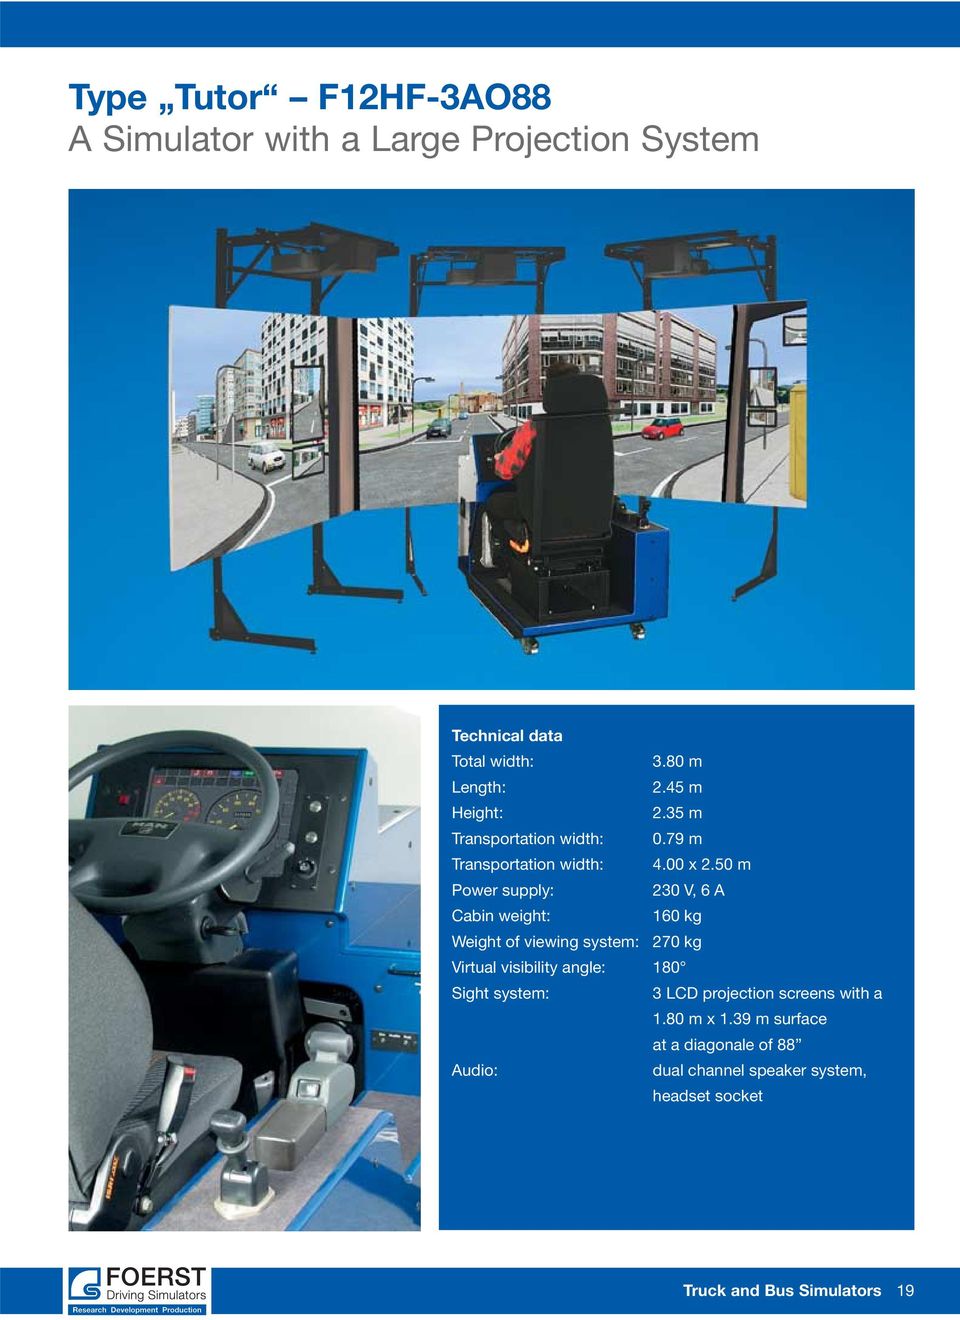 50 m Power supply: 230 V, 6 A Cabin weight: 160 kg Weight of viewing system: 270 kg Virtual visibility angle: 180